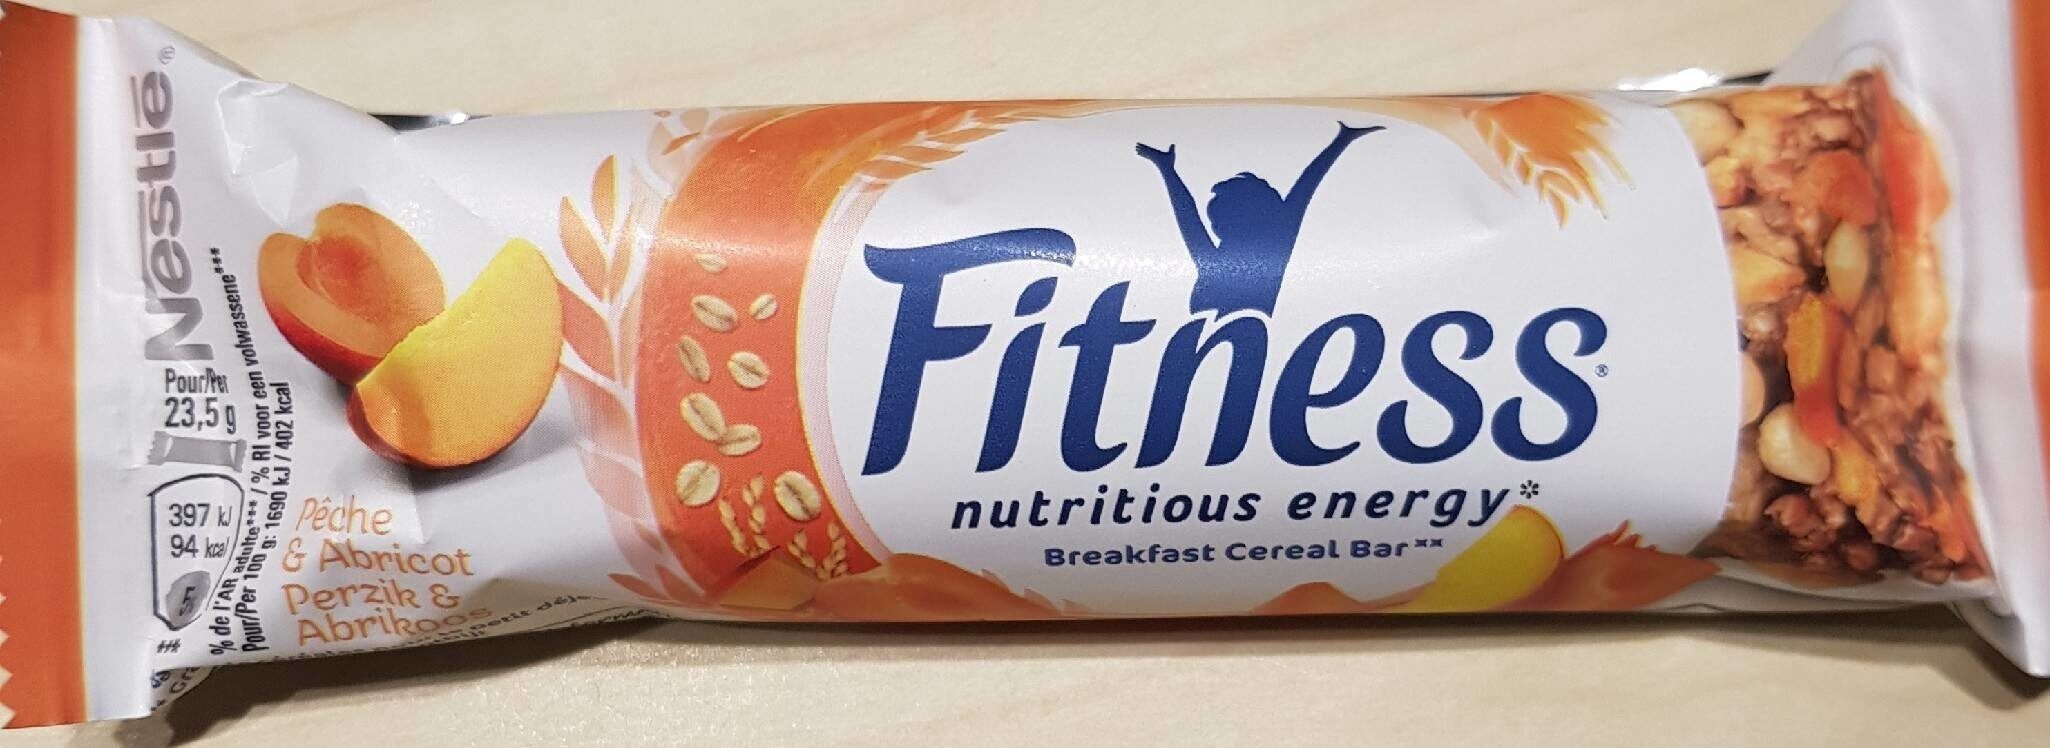 Fitness breakfast cereal bar pêches et abricot - Product